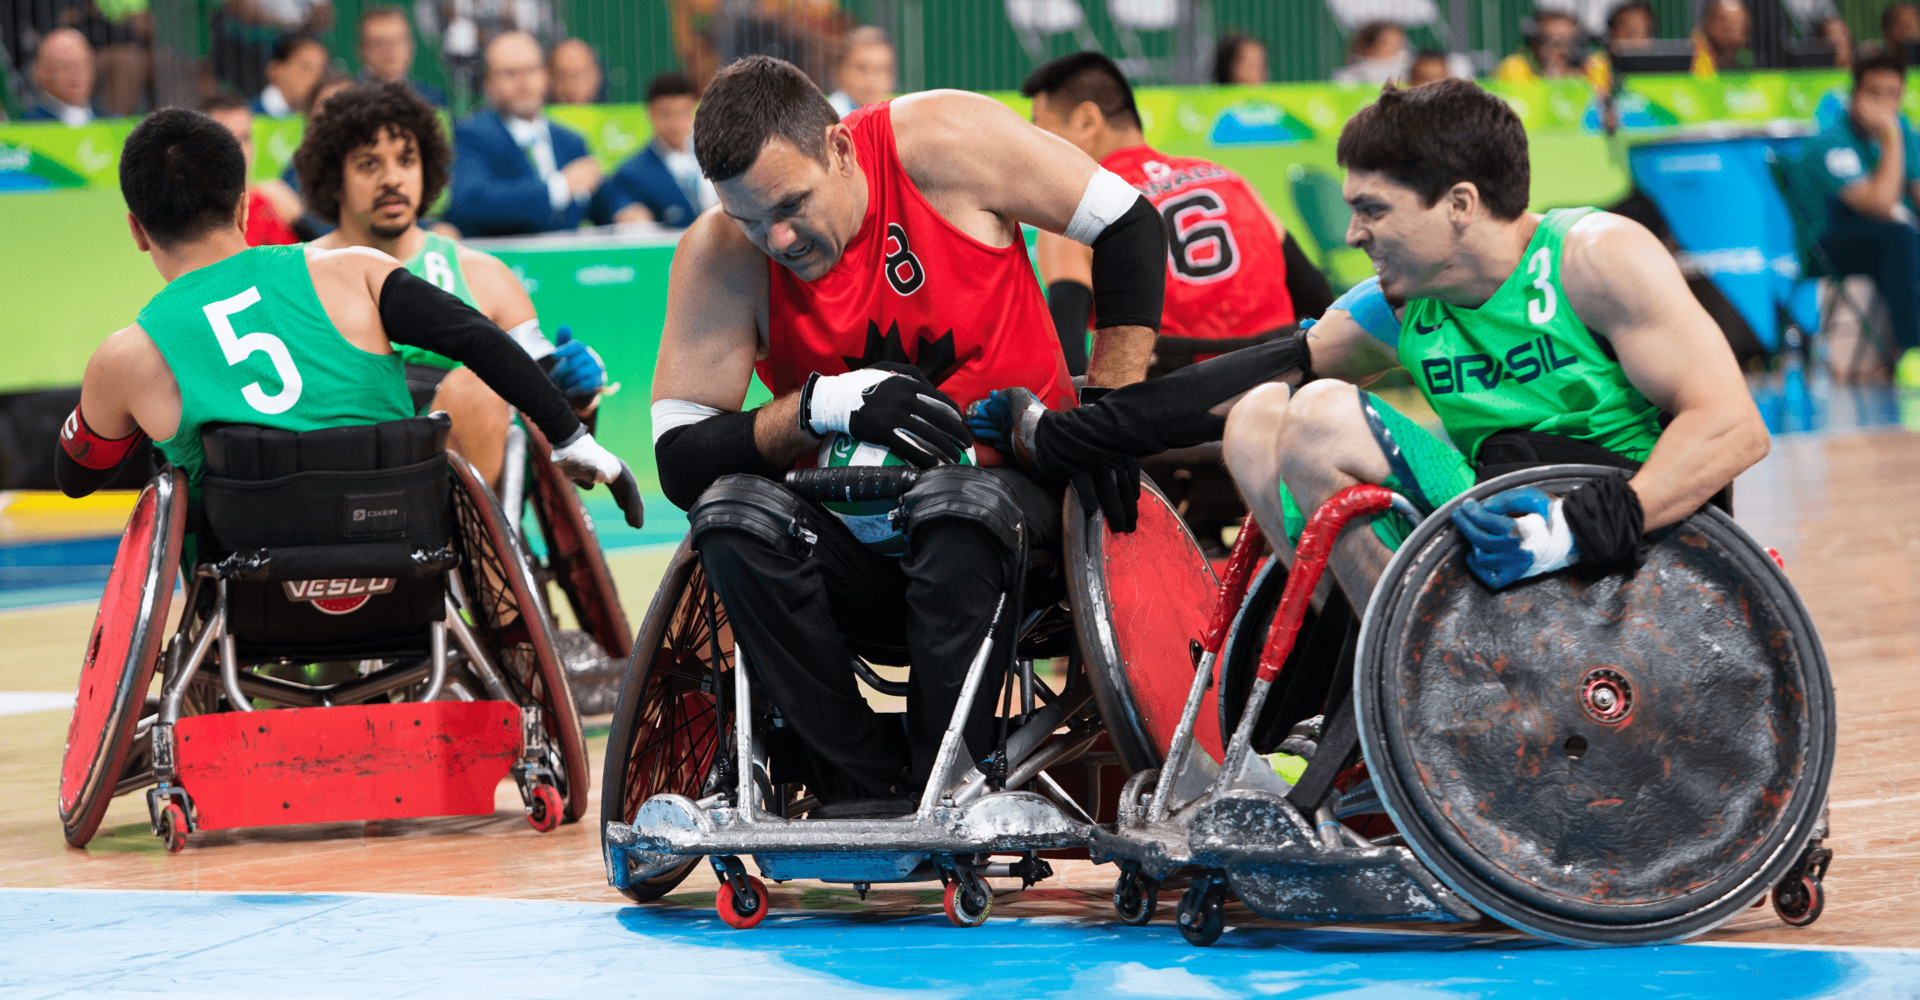 SENSE OF COMMUNITY KEEPS WHEELCHAIR RUGBY’S MIKE WHITEHEAD IN-BOUNDS